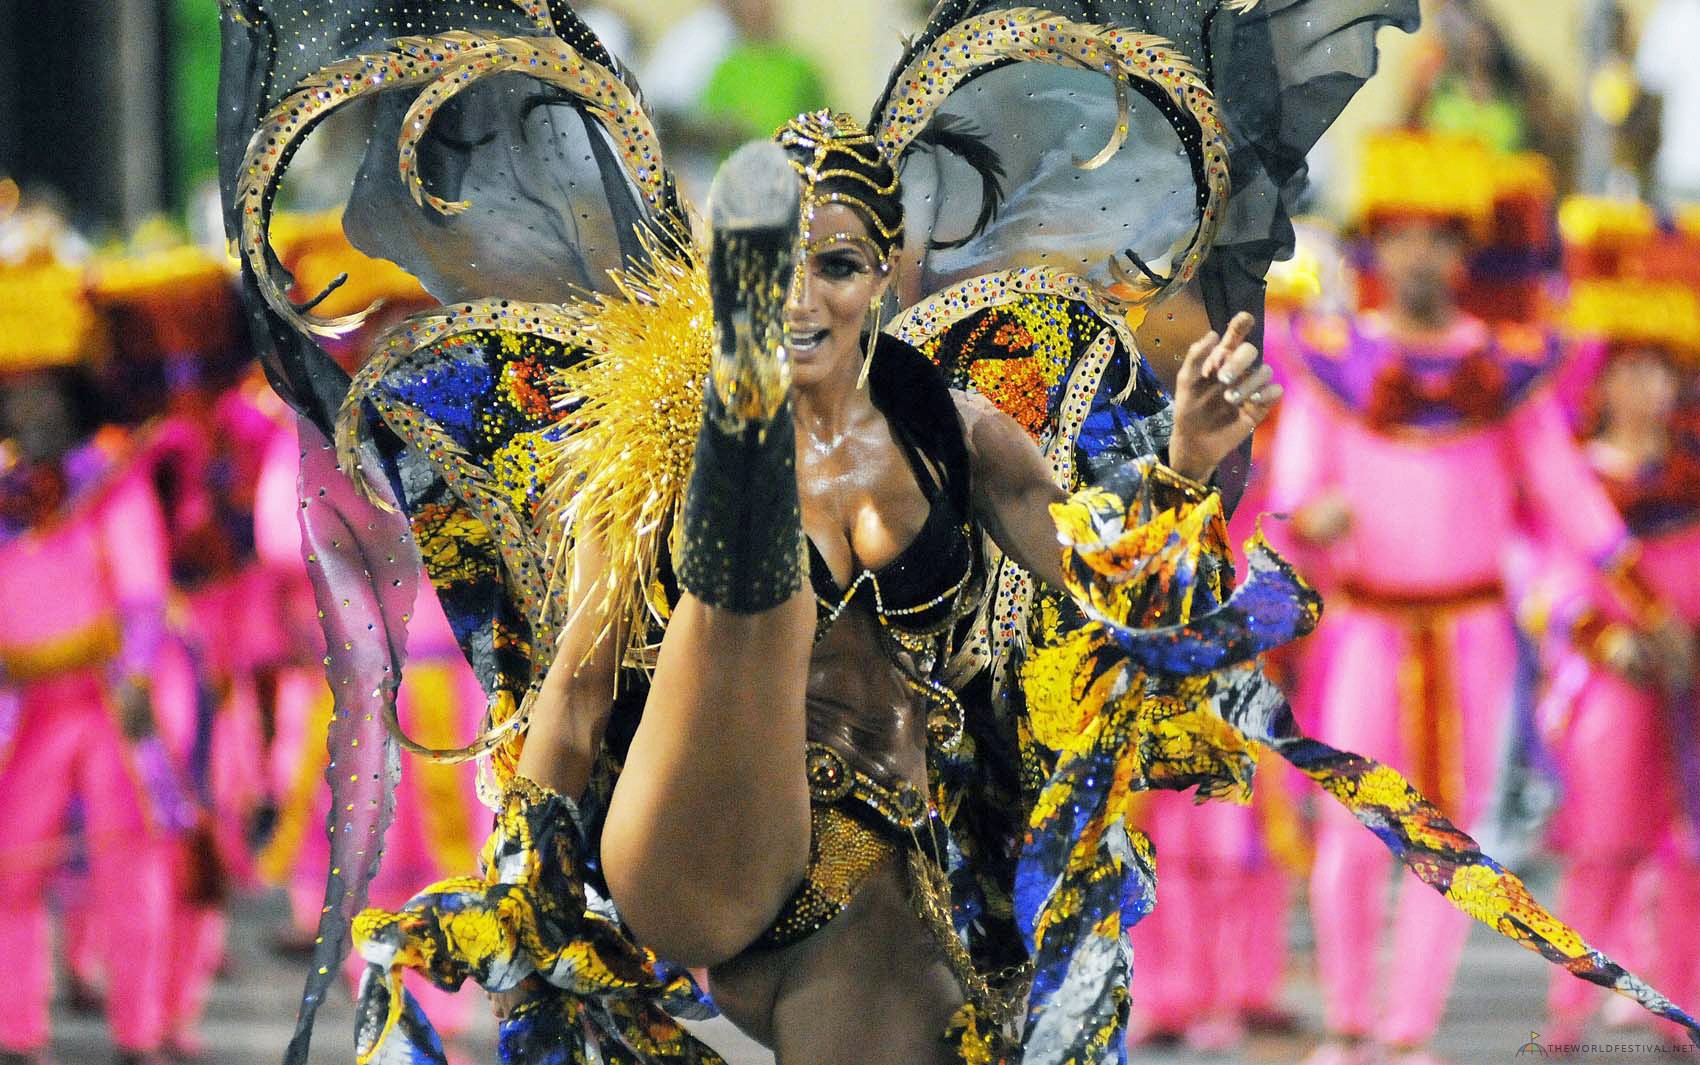 More exotic, sexy Brazil Carnival pics | Galleries 